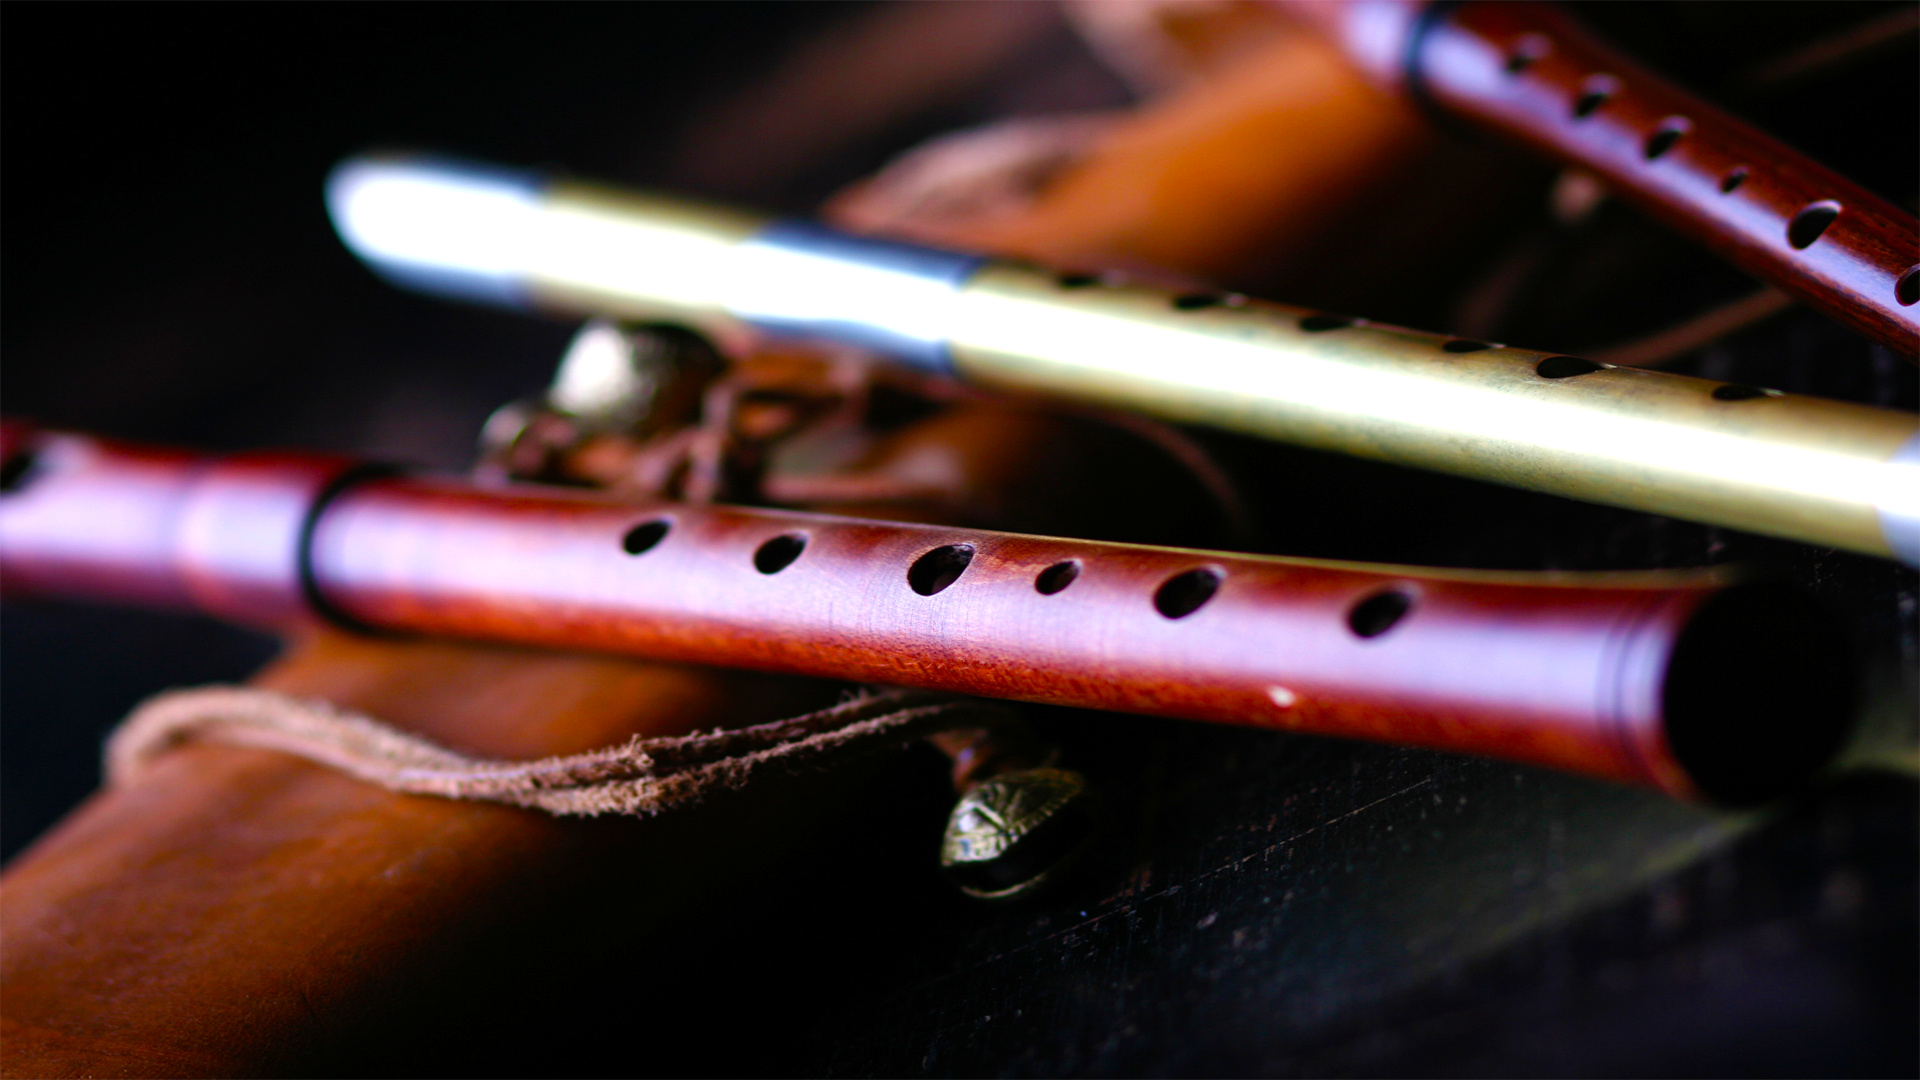 Flute: Music for meditation, A tube-shaped musical instrument with a row of holes along its side. 1920x1080 Full HD Background.